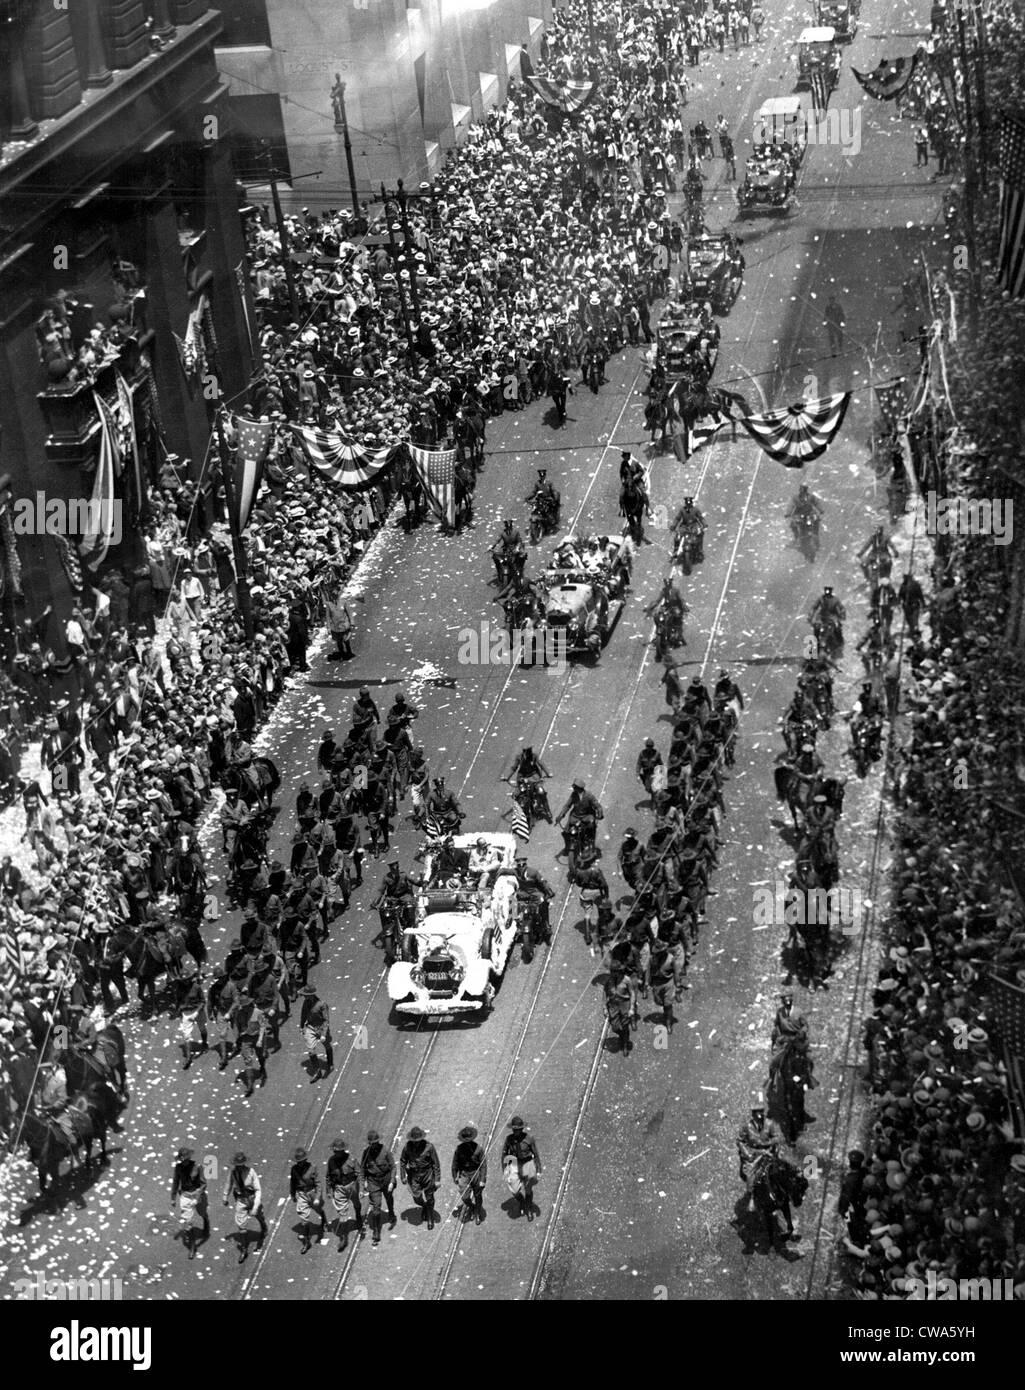 A ticker-tape parade for Charles Lindbergh in New York after his trans-Atlantic flight in 1927.. Courtesy: CSU Archives / Stock Photo